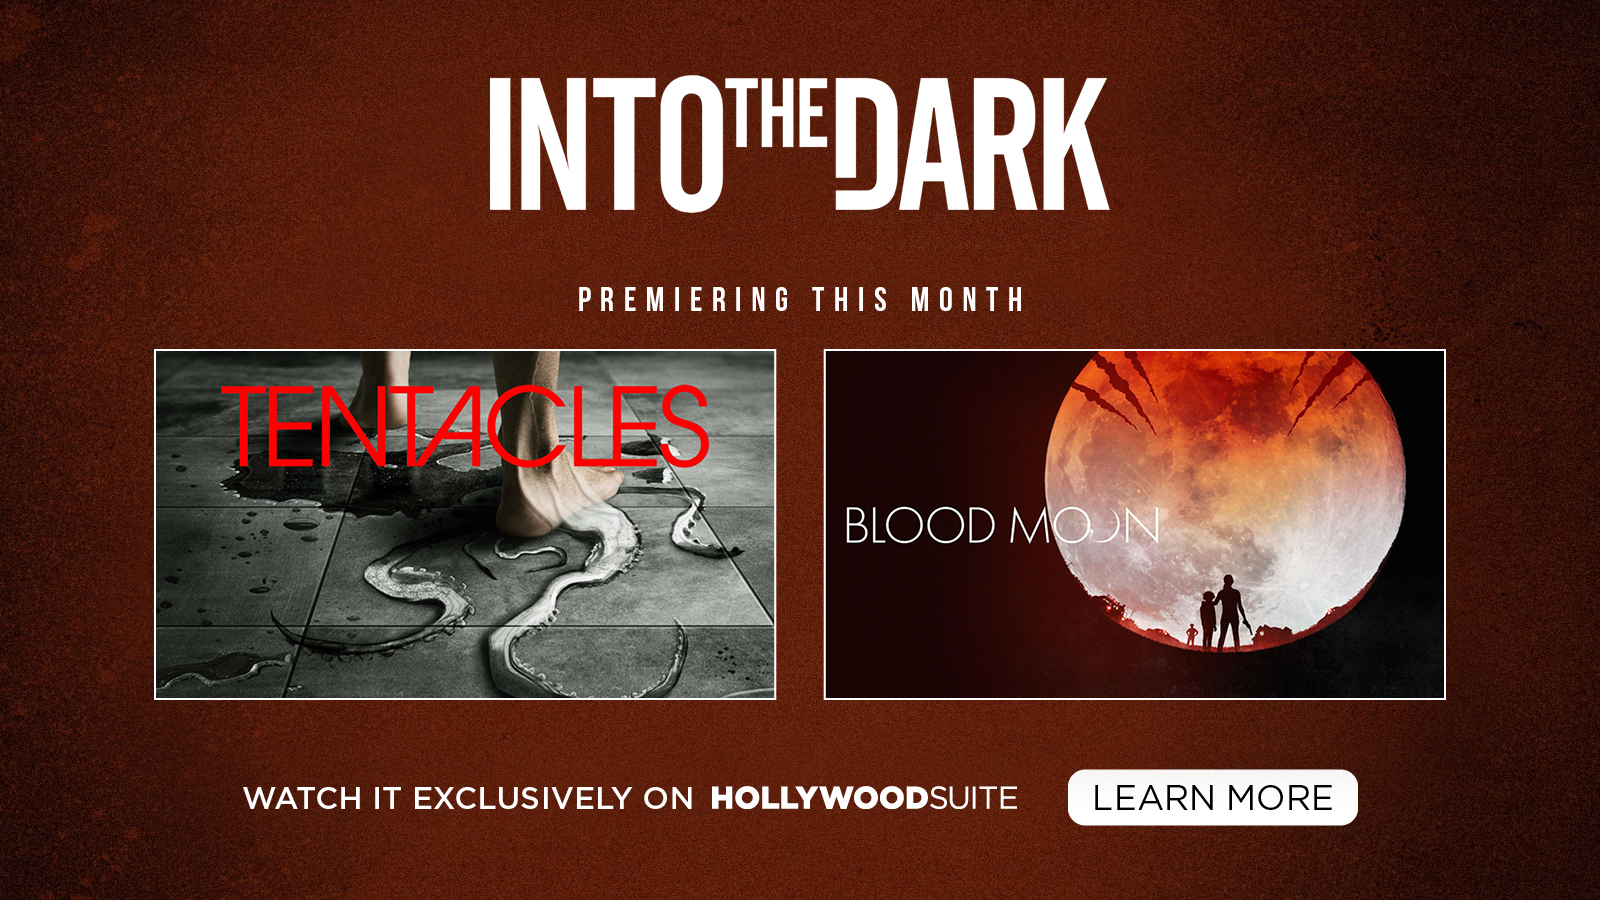 Into the Dark premiering this month: Tentacles, Blood Moon. Watch exclusively on Hollywood Suite. Learn more.